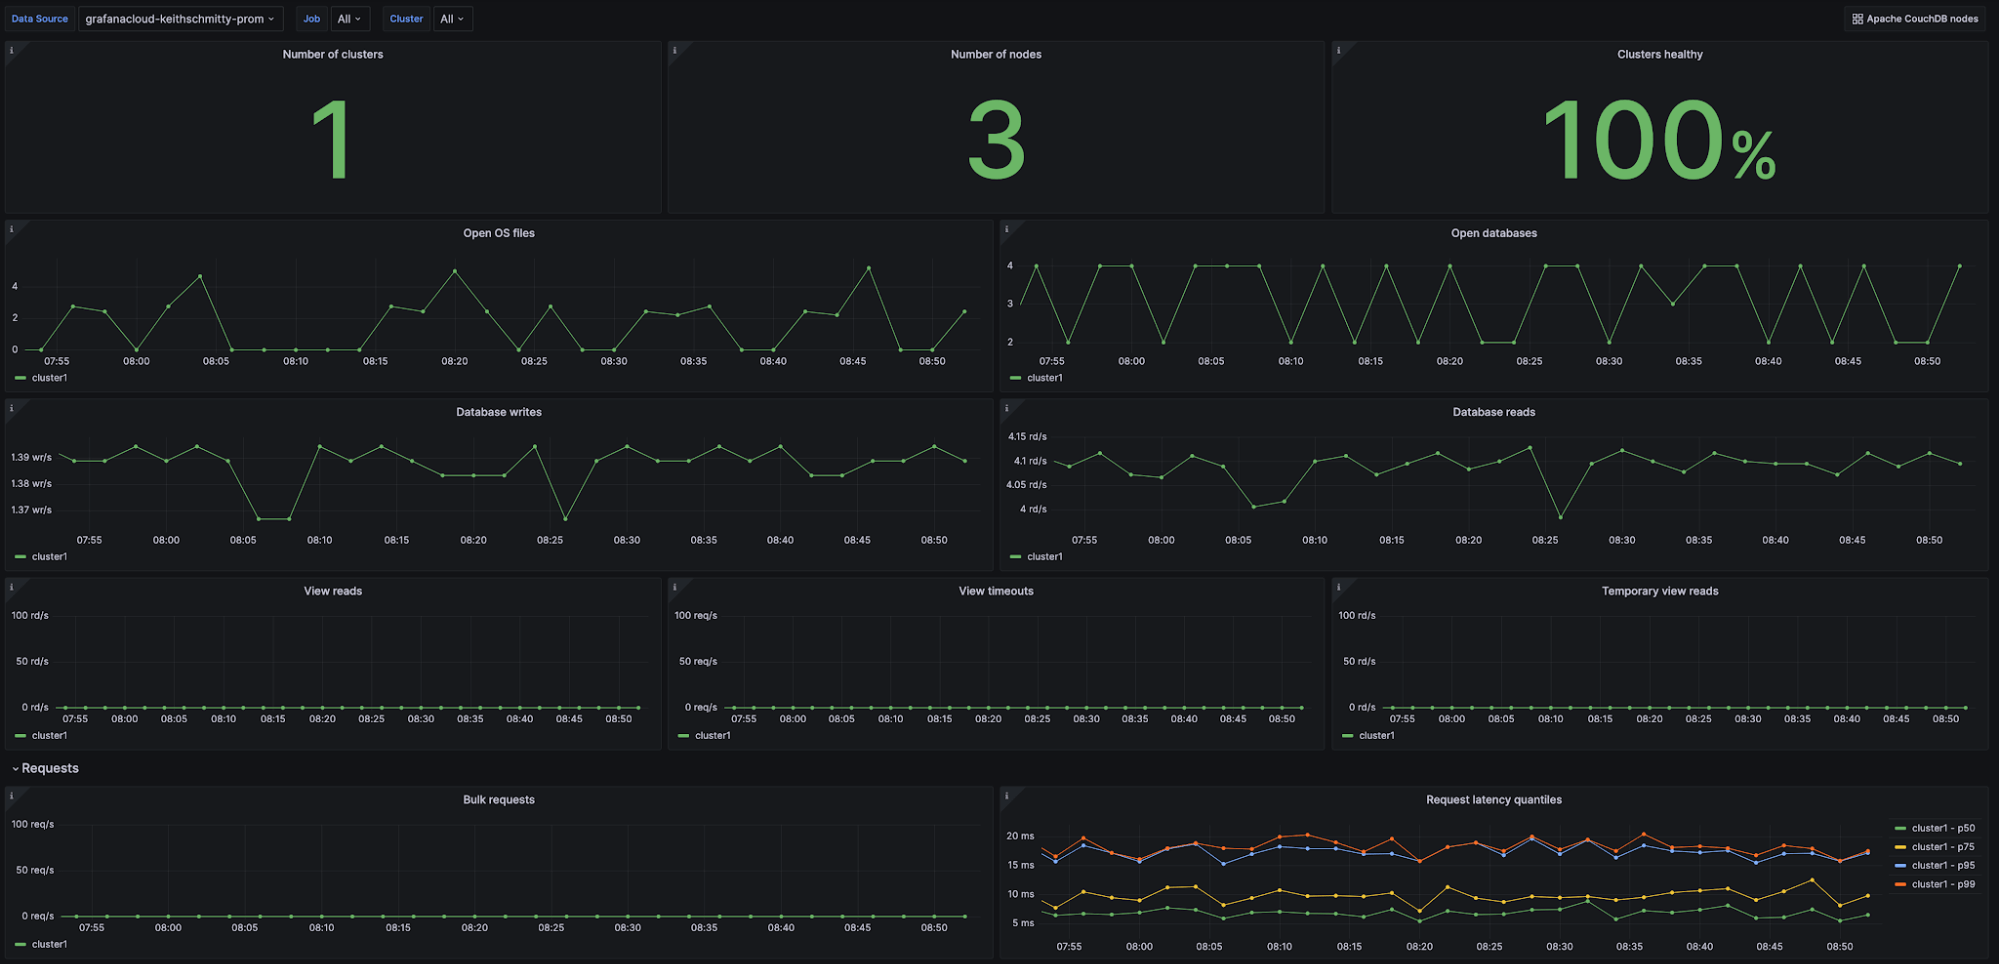 A Grafana Cloud dashboard displays metrics about clusters, nodes, reads, writes, requests, and latency.